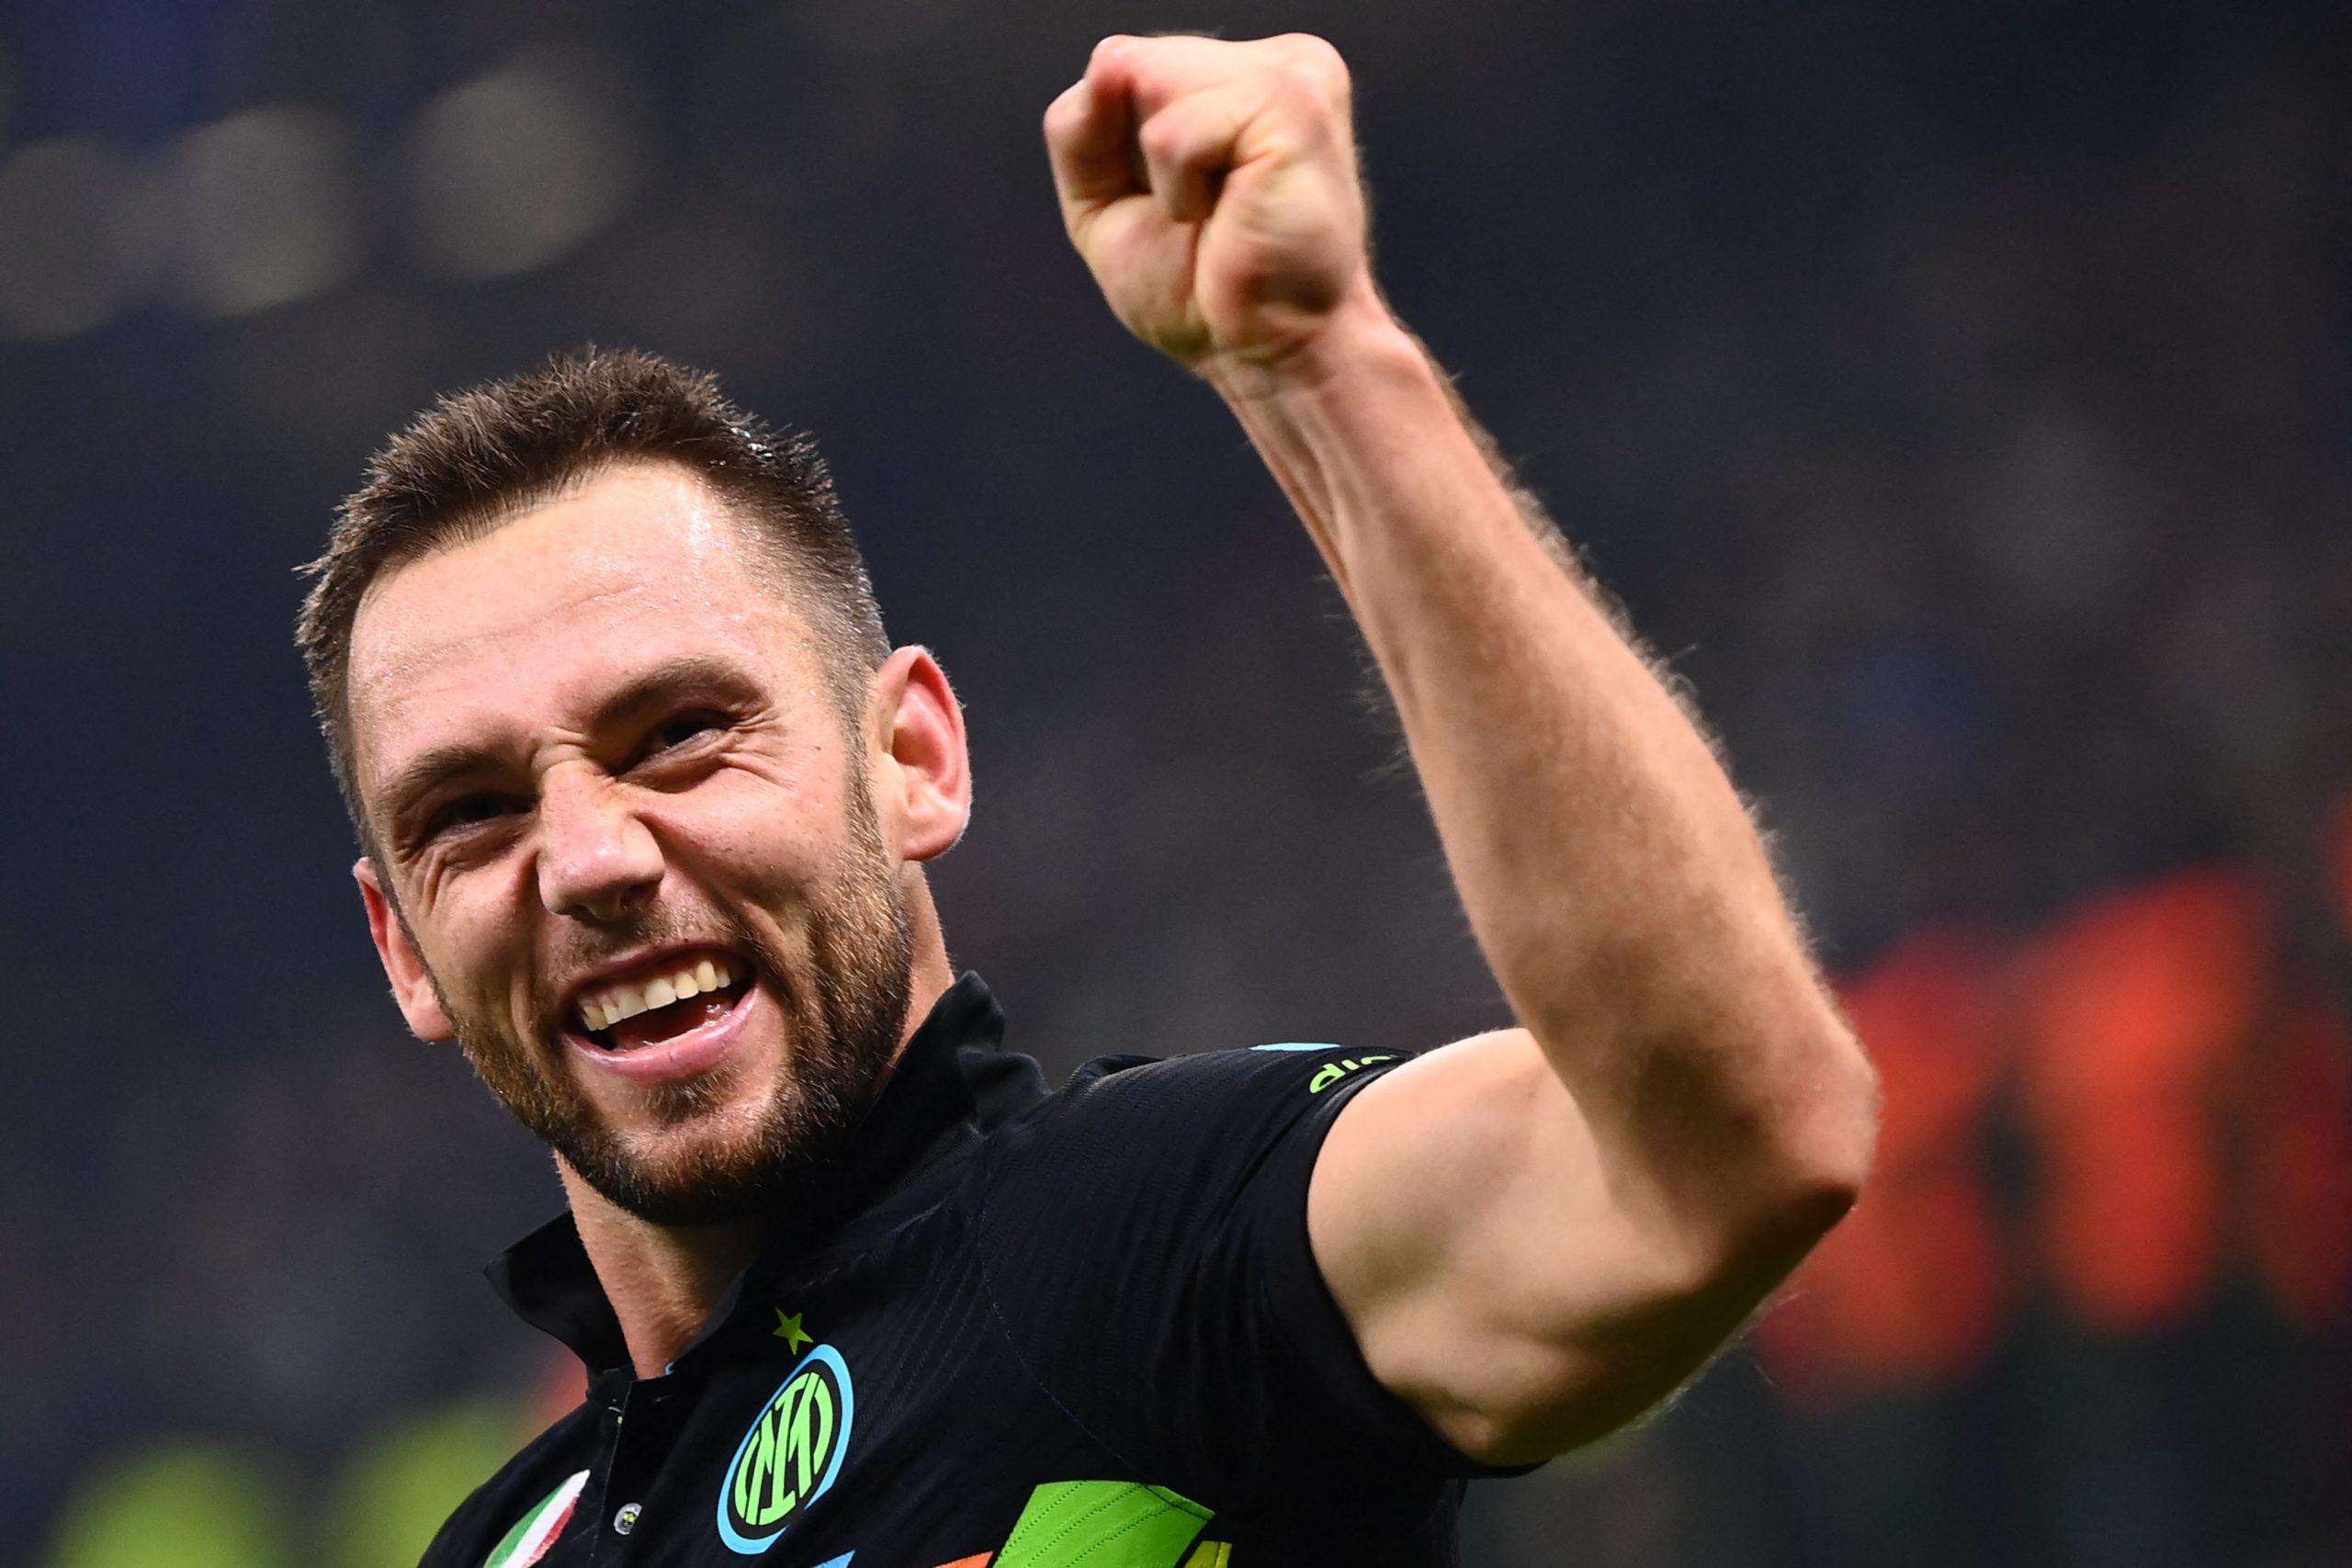 Inter Milan's Dutch defender Stefan de Vrij celebrates after scoring the 3-1 goal during the UEFA Champions League Group D football match between Inter Milan and FC Sheriff Tiraspol on October 19, 2021 at the Giuseppe-Meazza (San Siro) stadium in Milan. (Photo by Marco BERTORELLO / AFP) (Photo by MARCO BERTORELLO/AFP via Getty Images)The 4th Official uses images provided by the following image agency: Getty Images (https://www.gettyimages.de/) Imago Images (https://www.imago-images.de/)